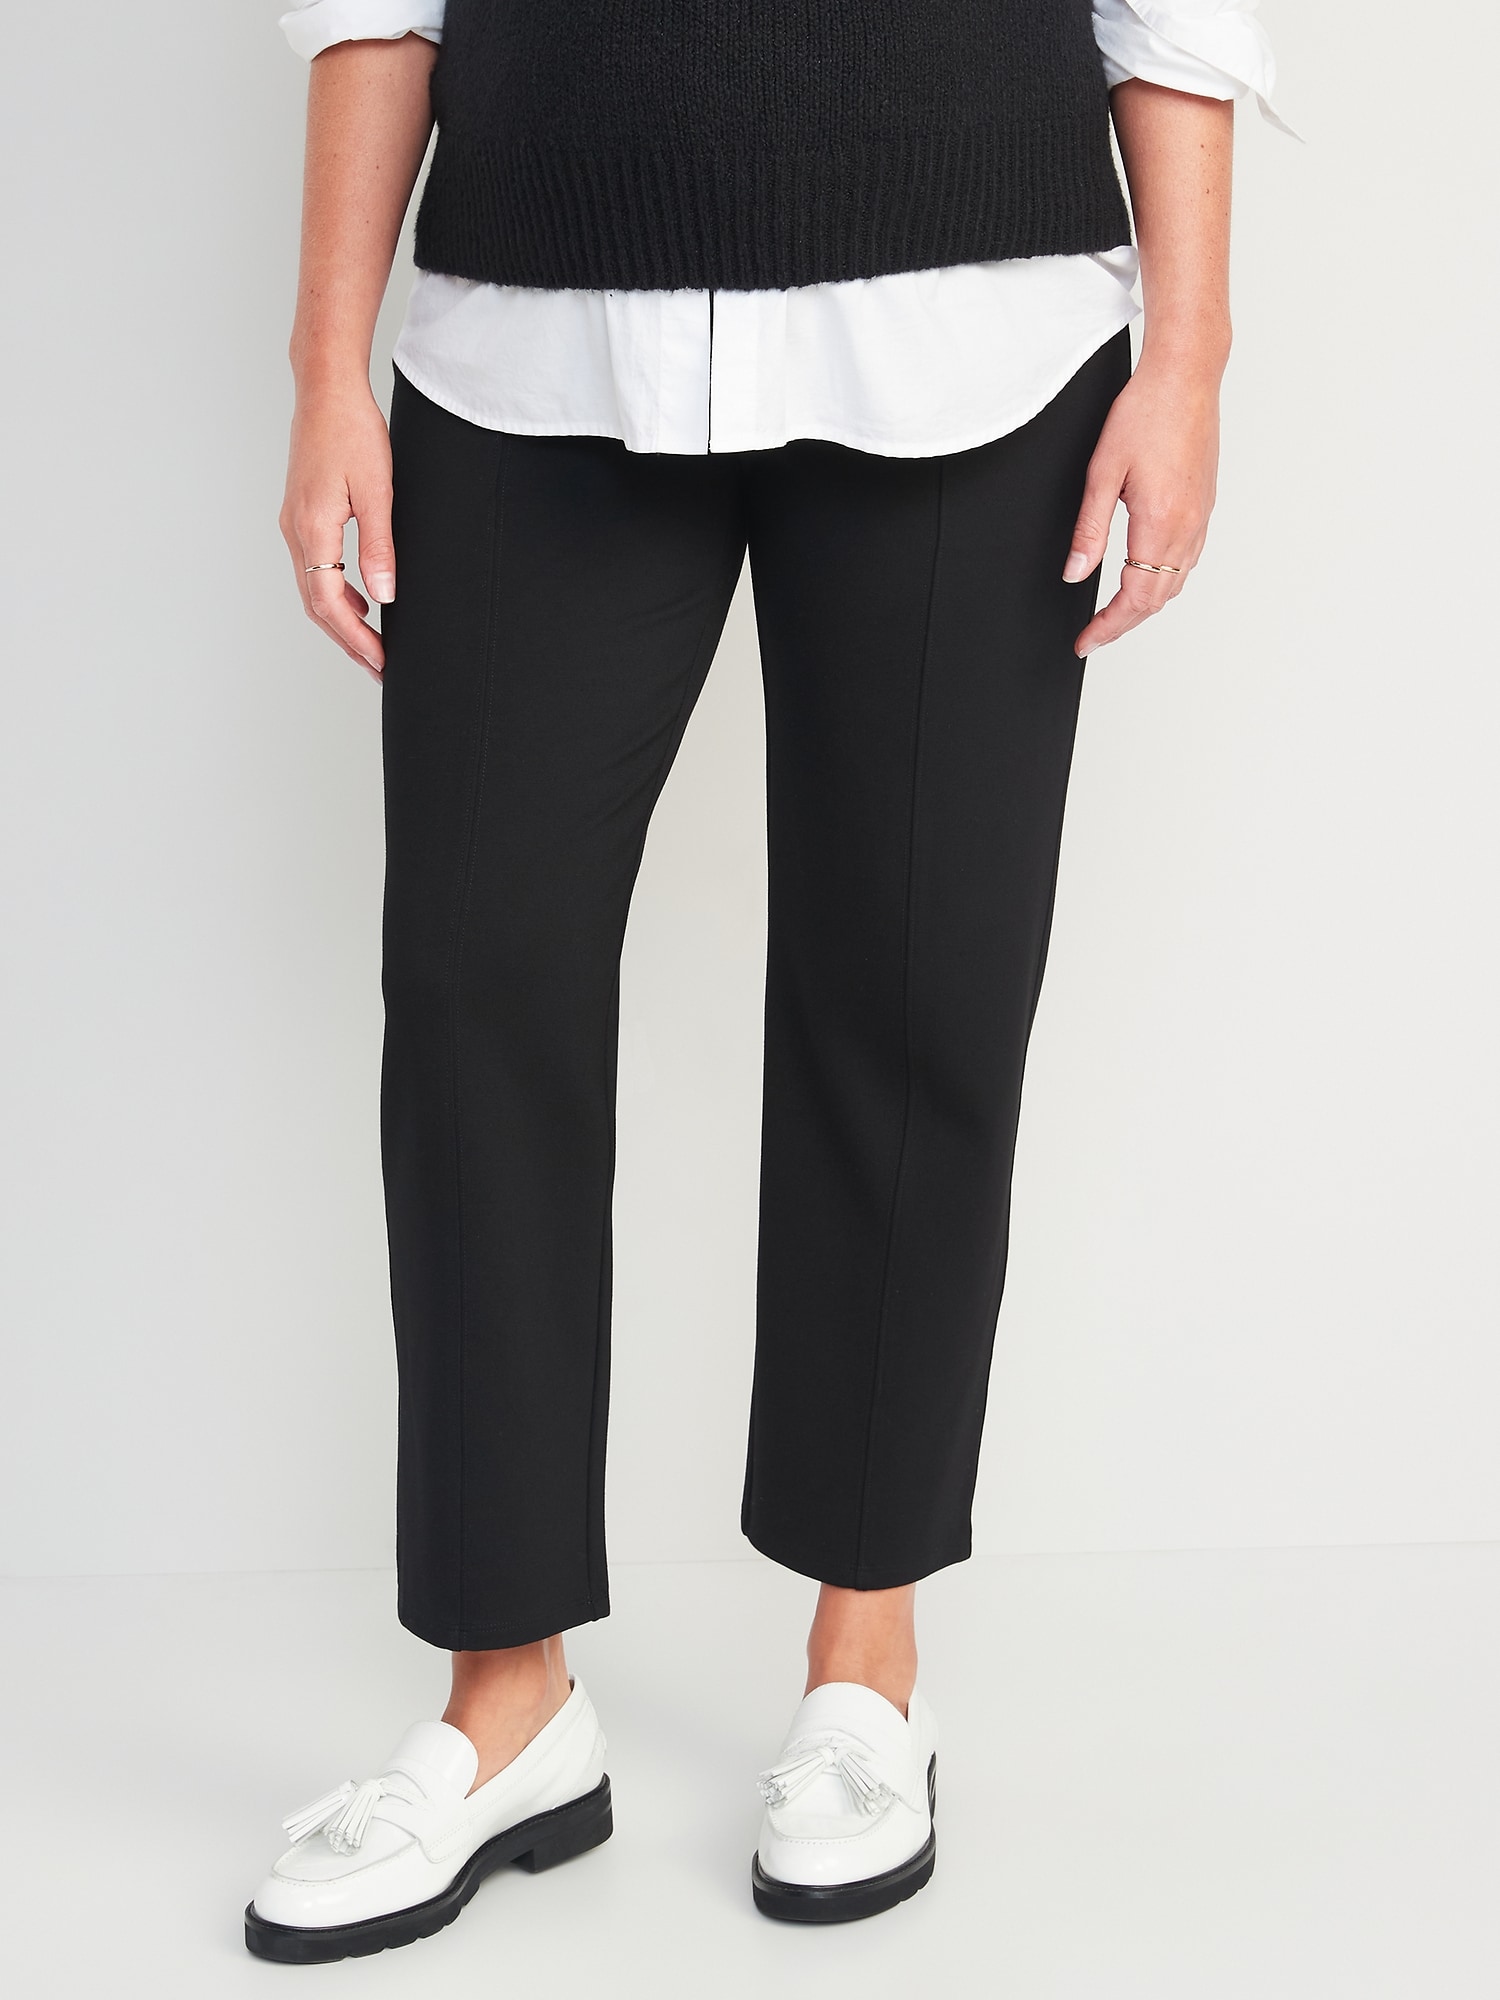 Old Navy - Maternity Solid Black Casual Pants Size 14 (Maternity) - 49% off